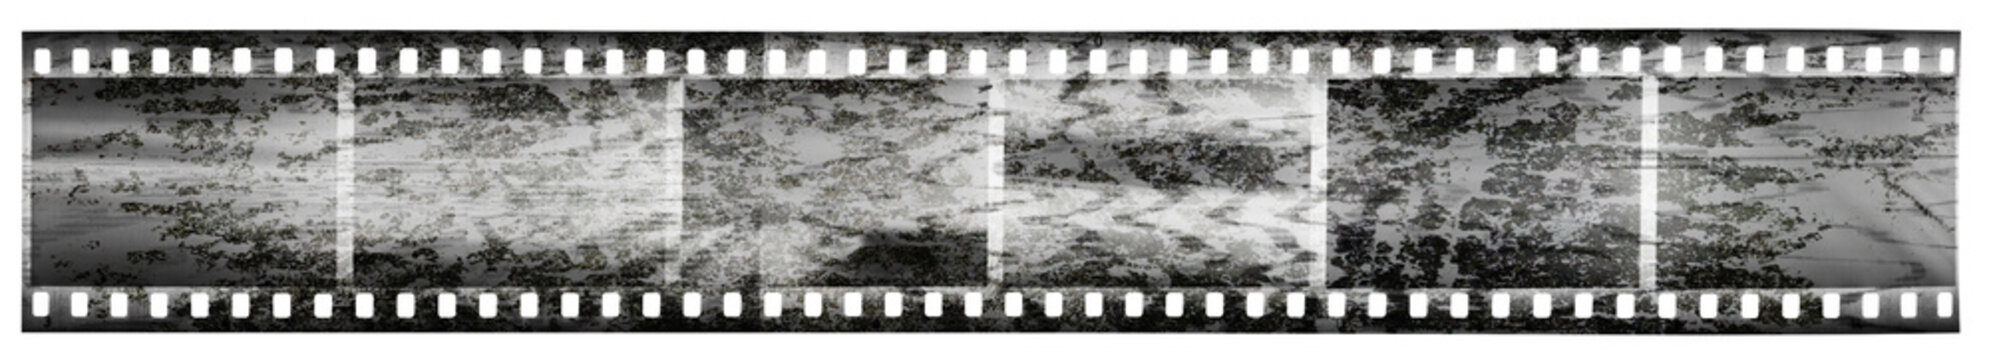 detail scan of long black and white 35mm filmstrip with massive scanning light interferences on the film material.